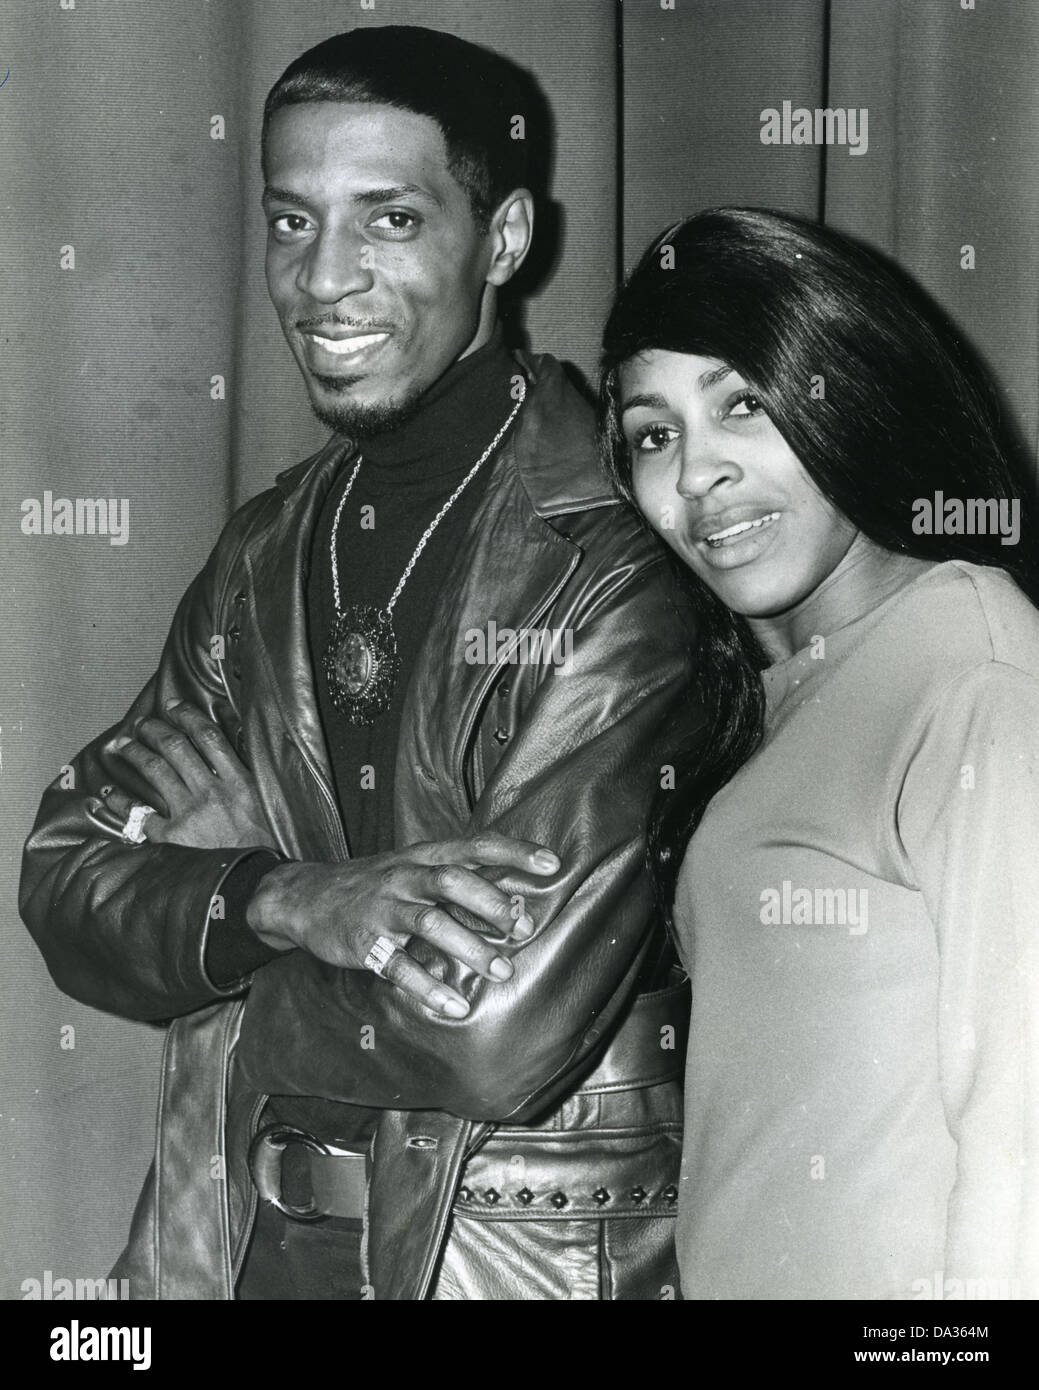 IKE AND TINA TURNER  US rock musicians in April 1968. Photo Tony Gale Stock Photo